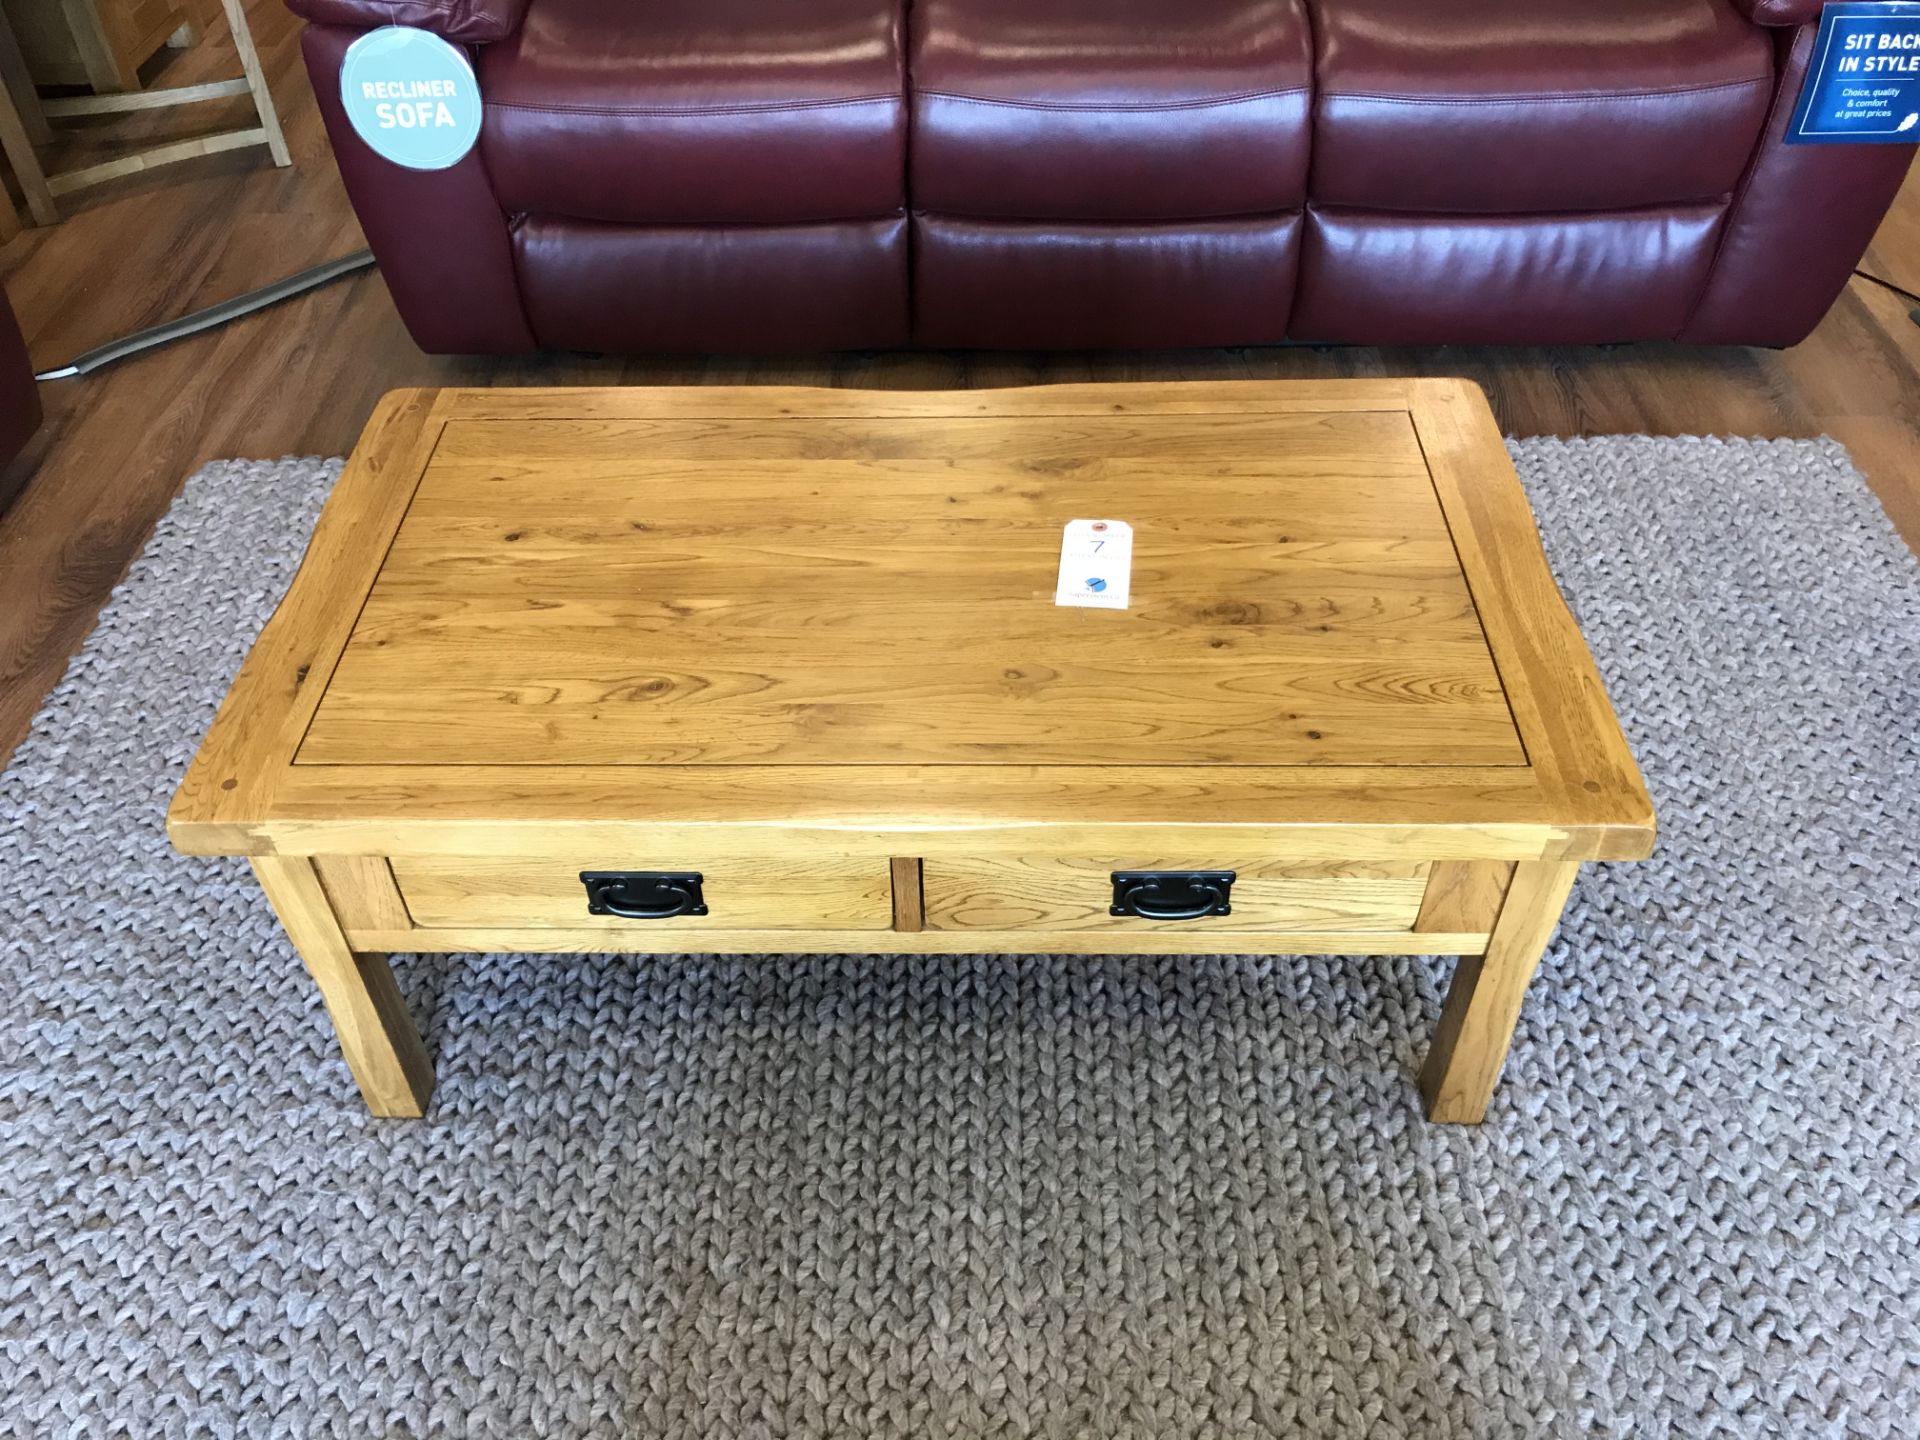 4-Drawer Storage Coffee Table (Original Rustic) See Picture For Dimensions and Product Info